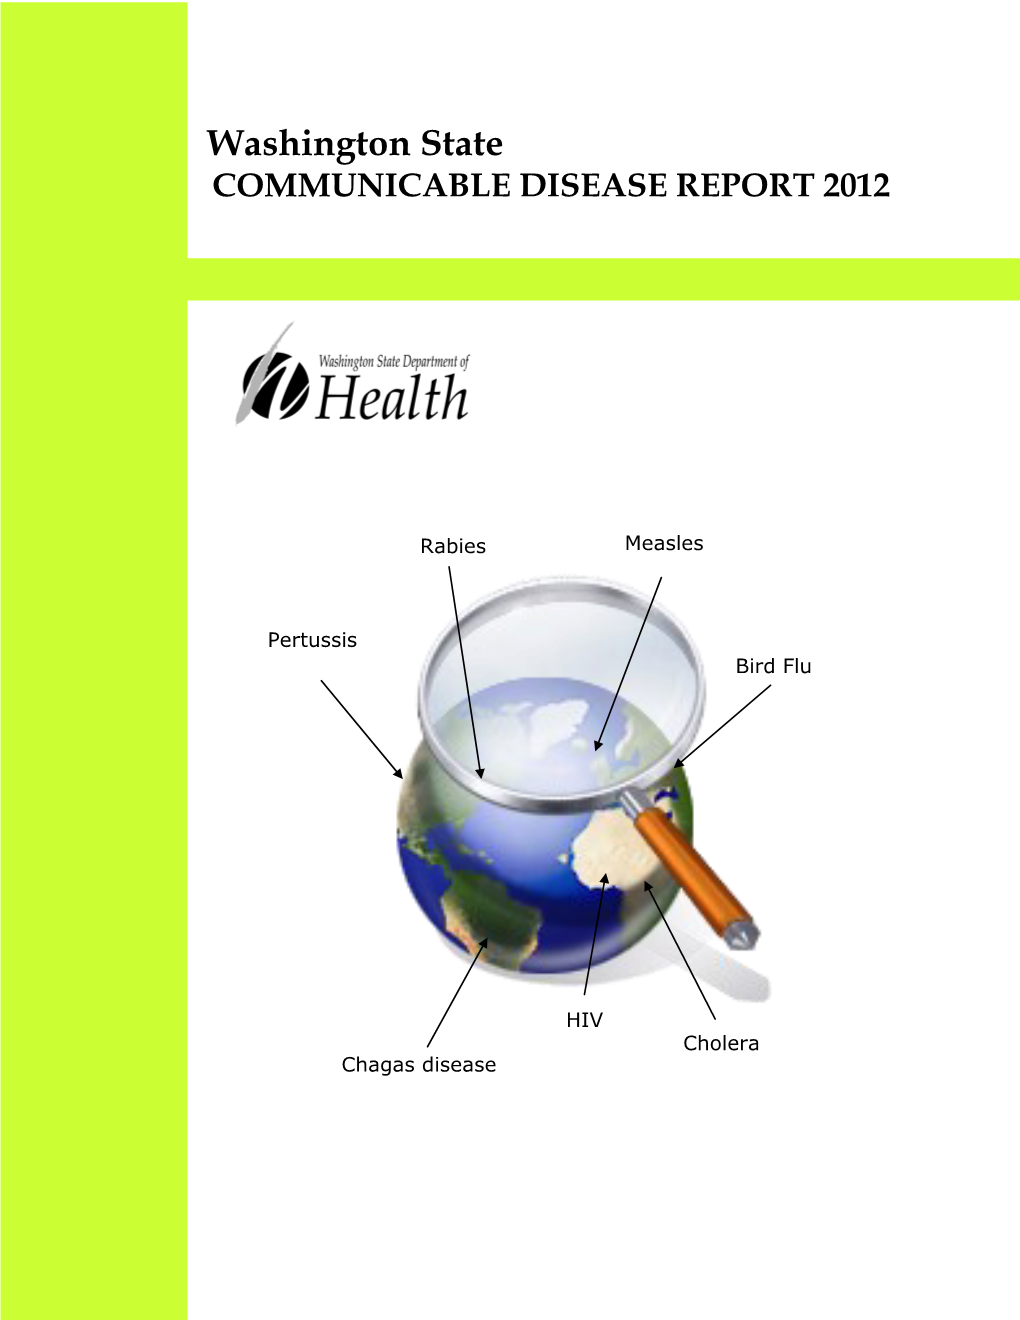 Washington State Annual Communicable Disease Report 2012